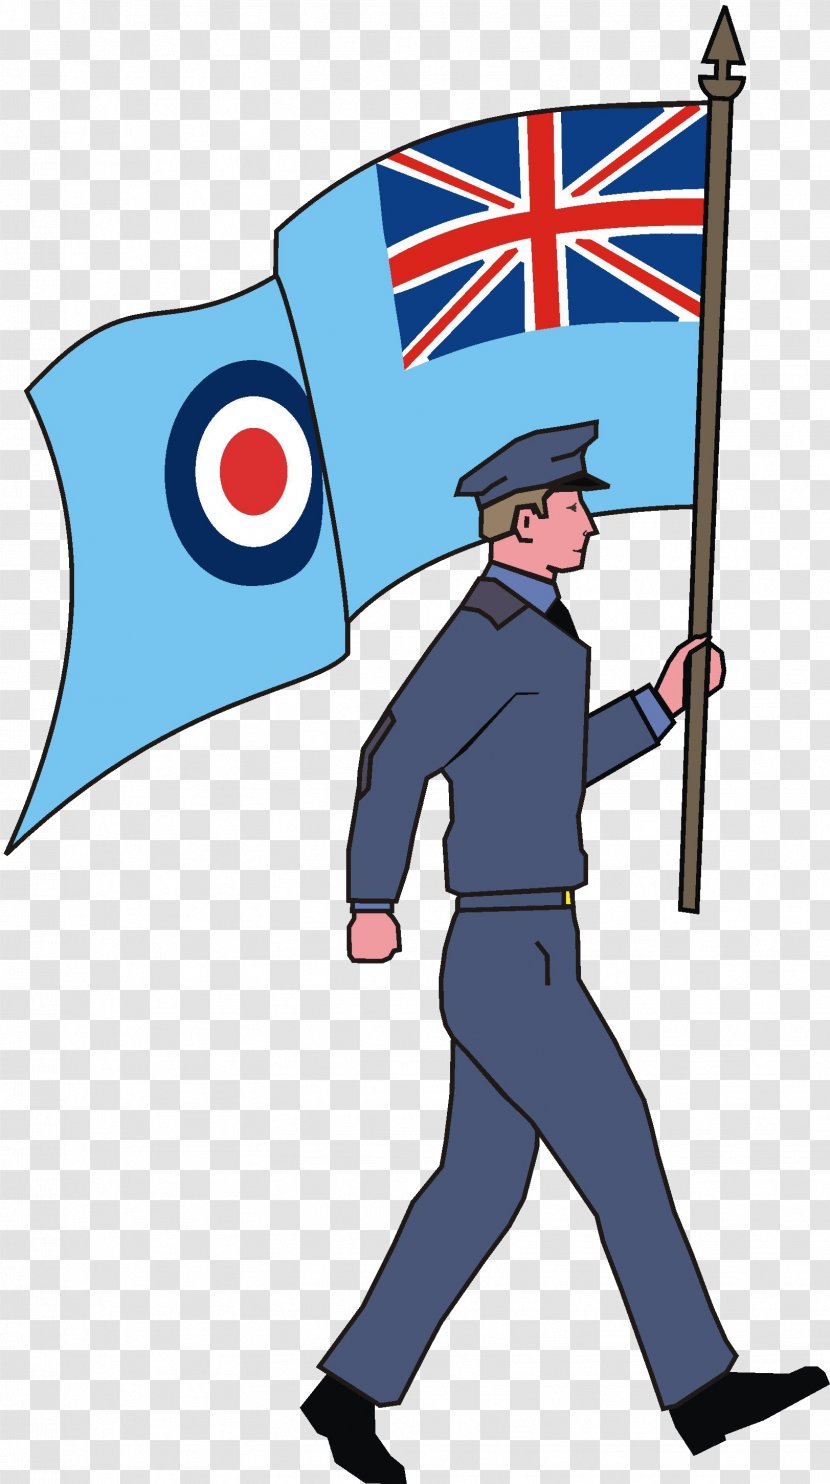 Royal Air Force Cadets Squadron Clip Art - Marching - Physical Training Uniform Transparent PNG